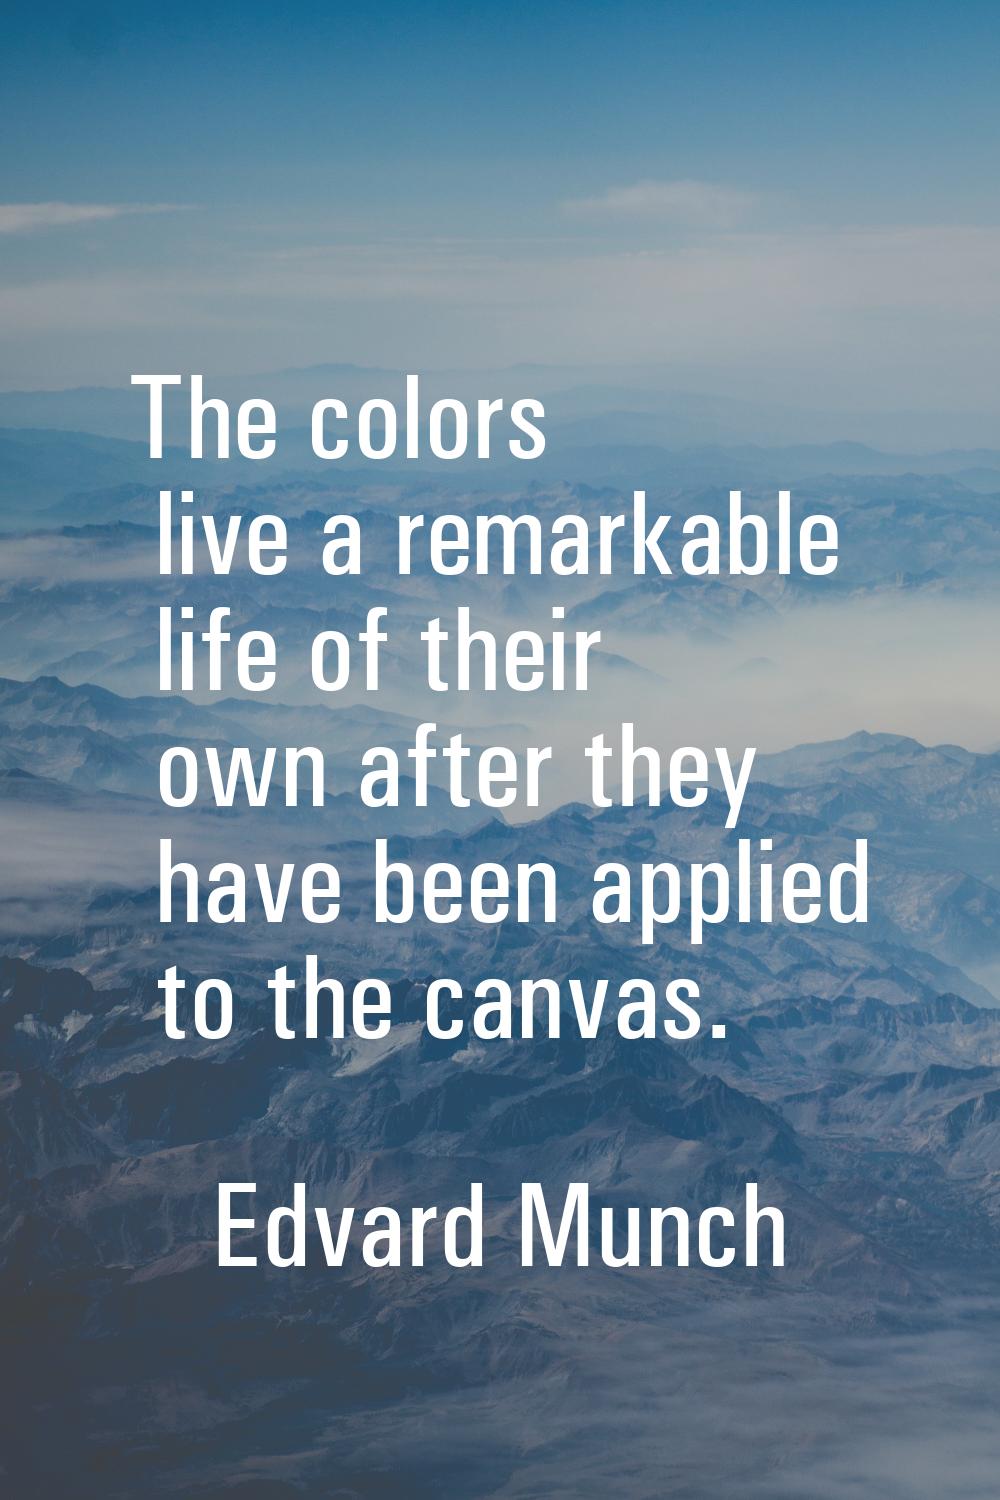 The colors live a remarkable life of their own after they have been applied to the canvas.